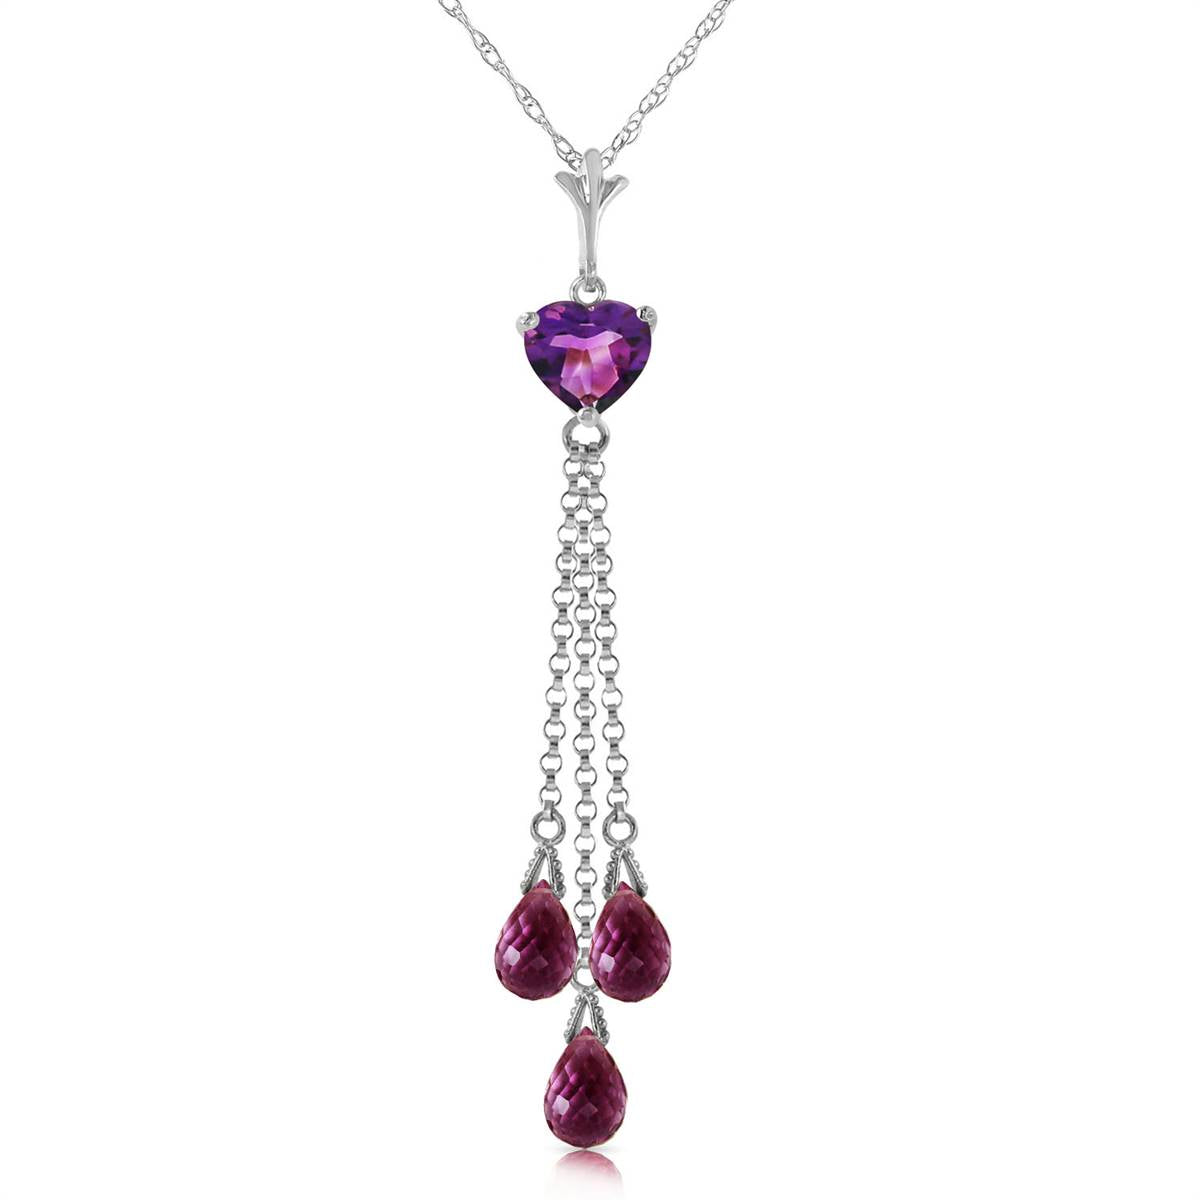 4.75 Carat 14K Solid White Gold Much Tenderness Amethyst Necklace